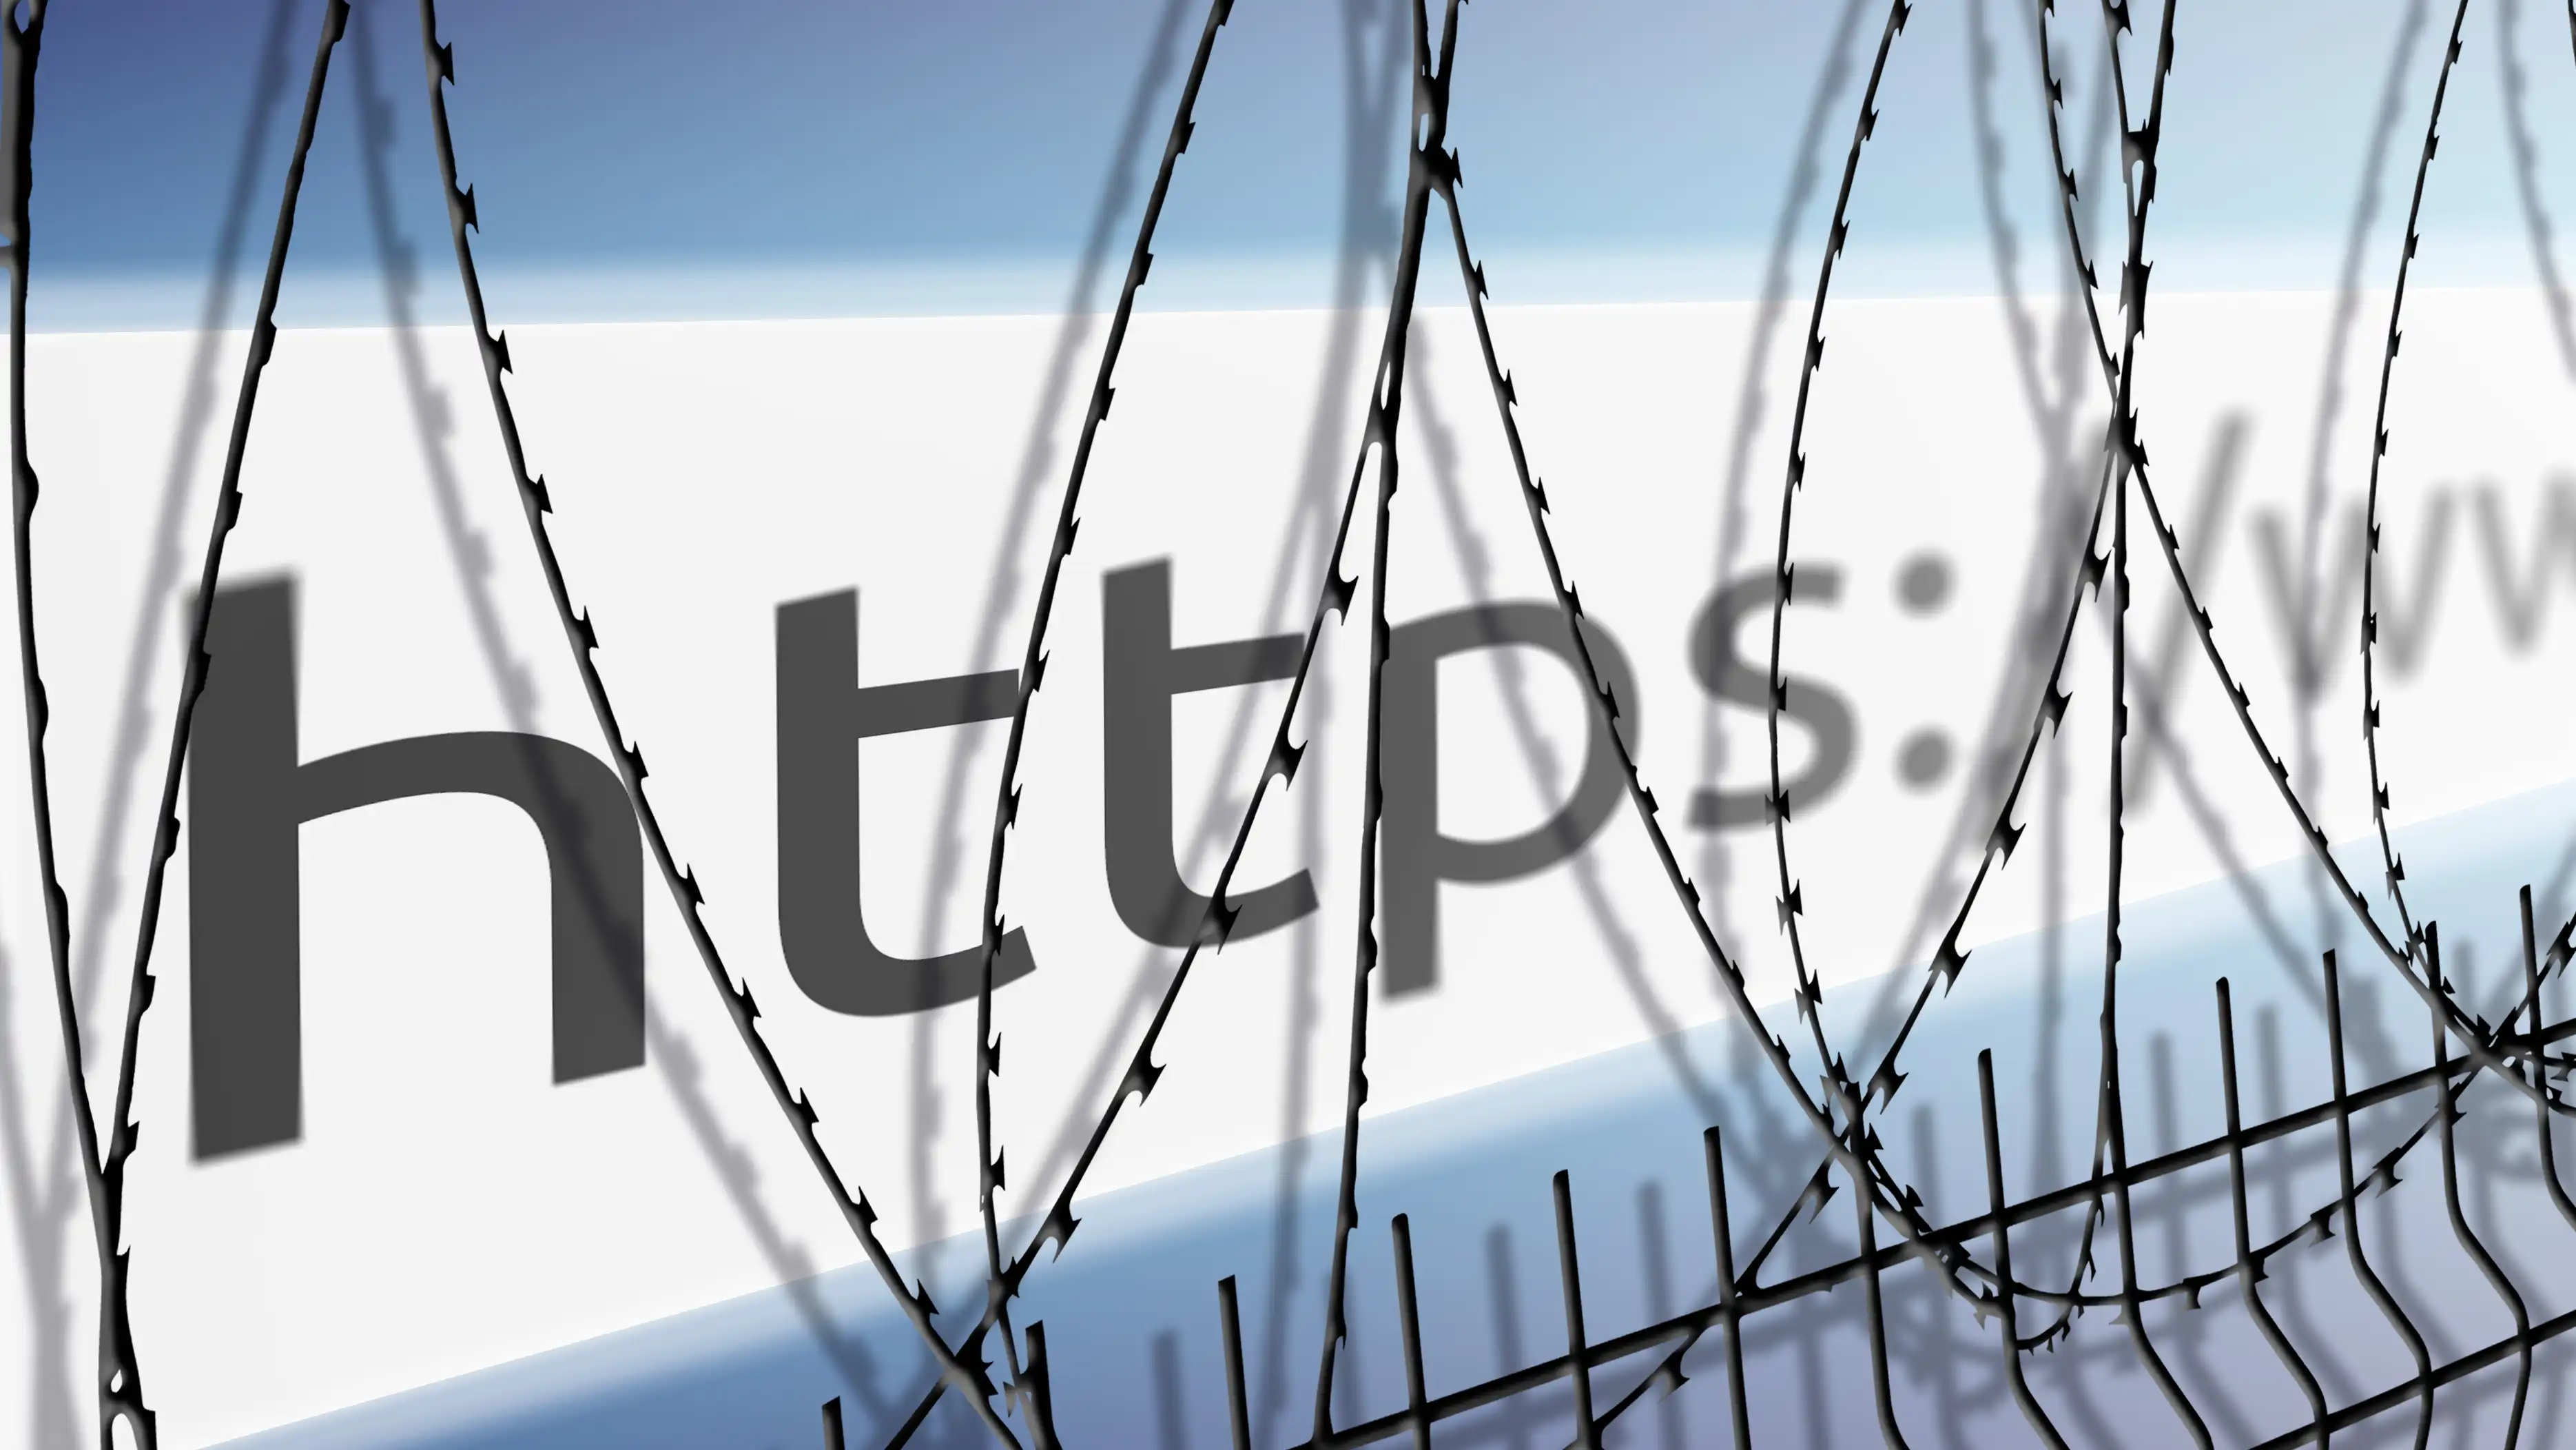 A URL blocked with barbed wire illustrates on-device content filtering with Jamf and Apple that blocks unsafe websites.